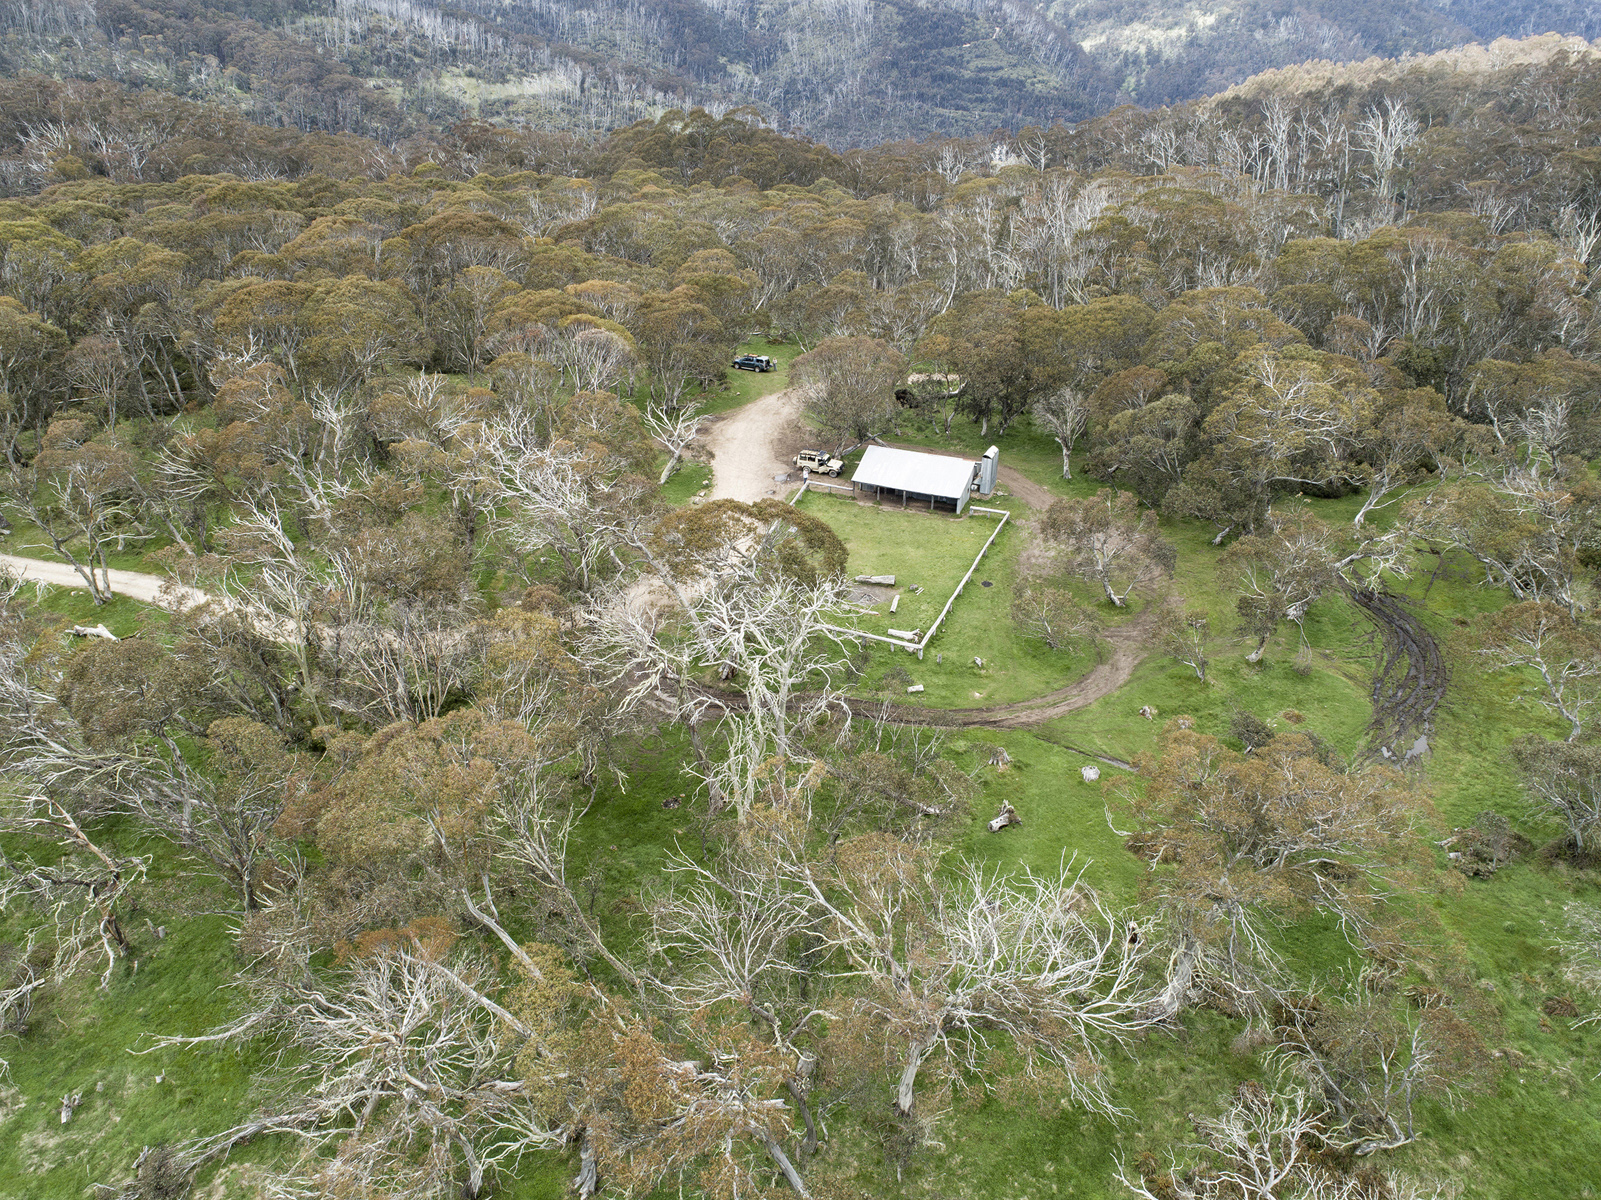 An aerial view of Lovick Hut amongst the snow gums